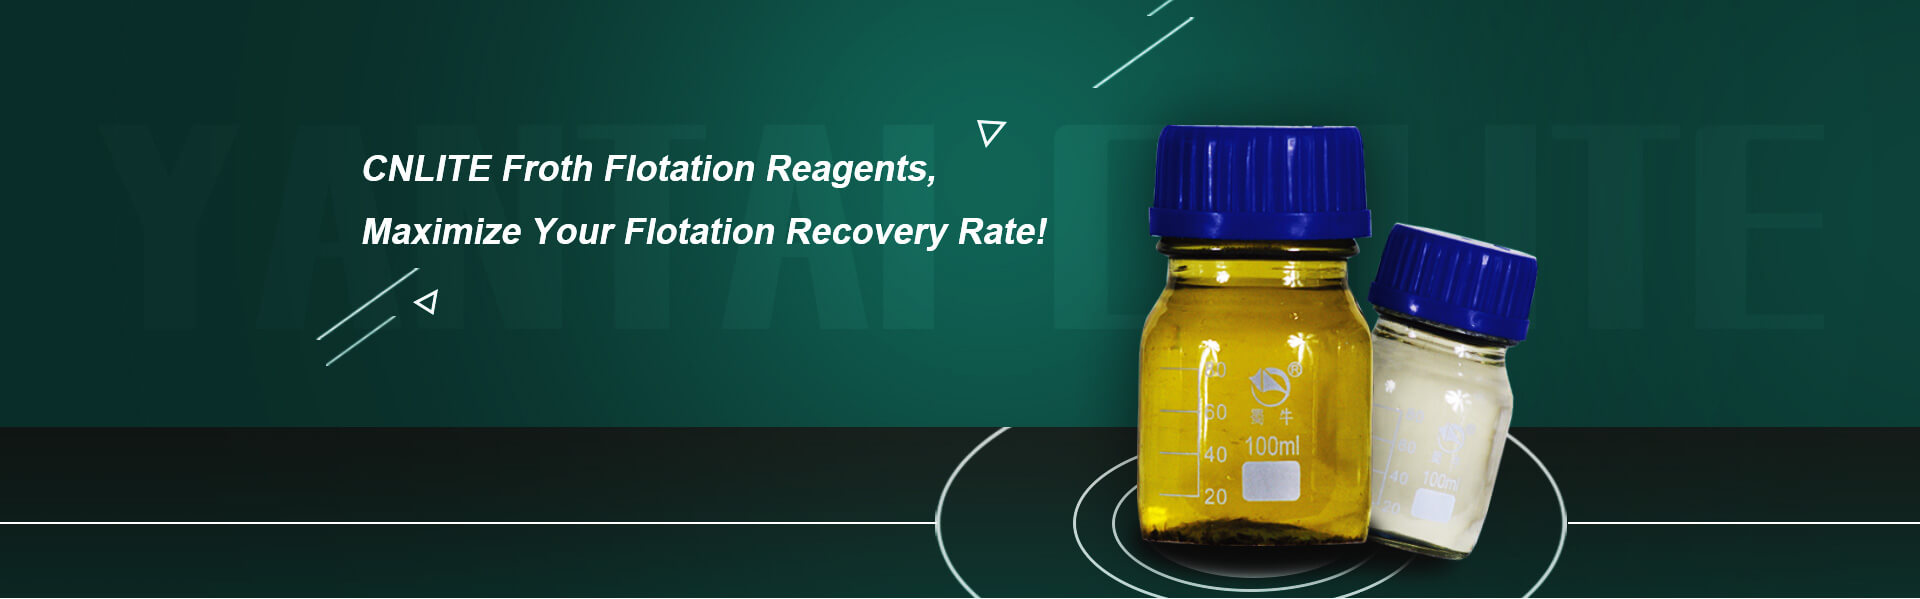 CNLITE Froth Flotation Reagents, Maximize Your Flotation Recovery Rate!